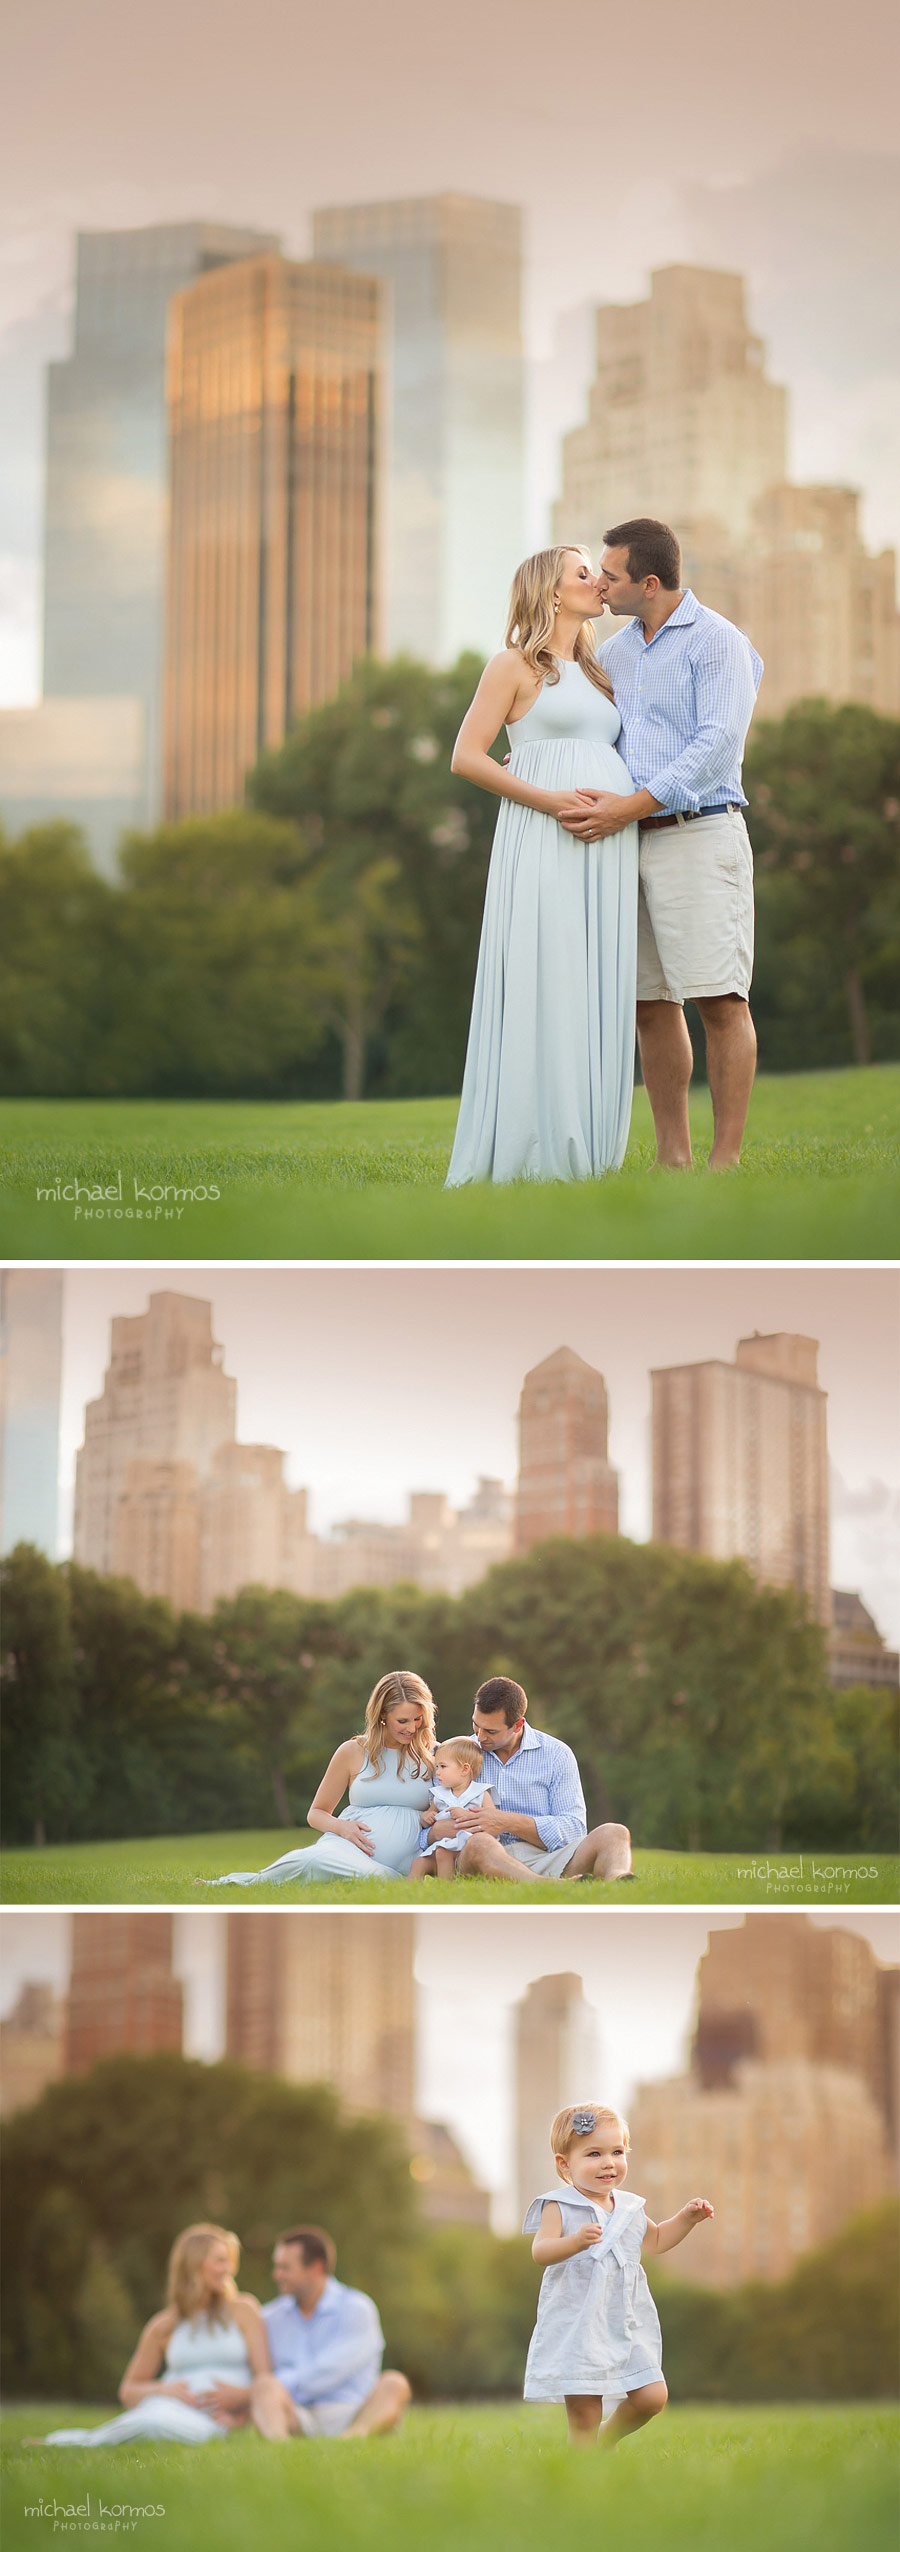 lifestyle baby photography outdoors nyc